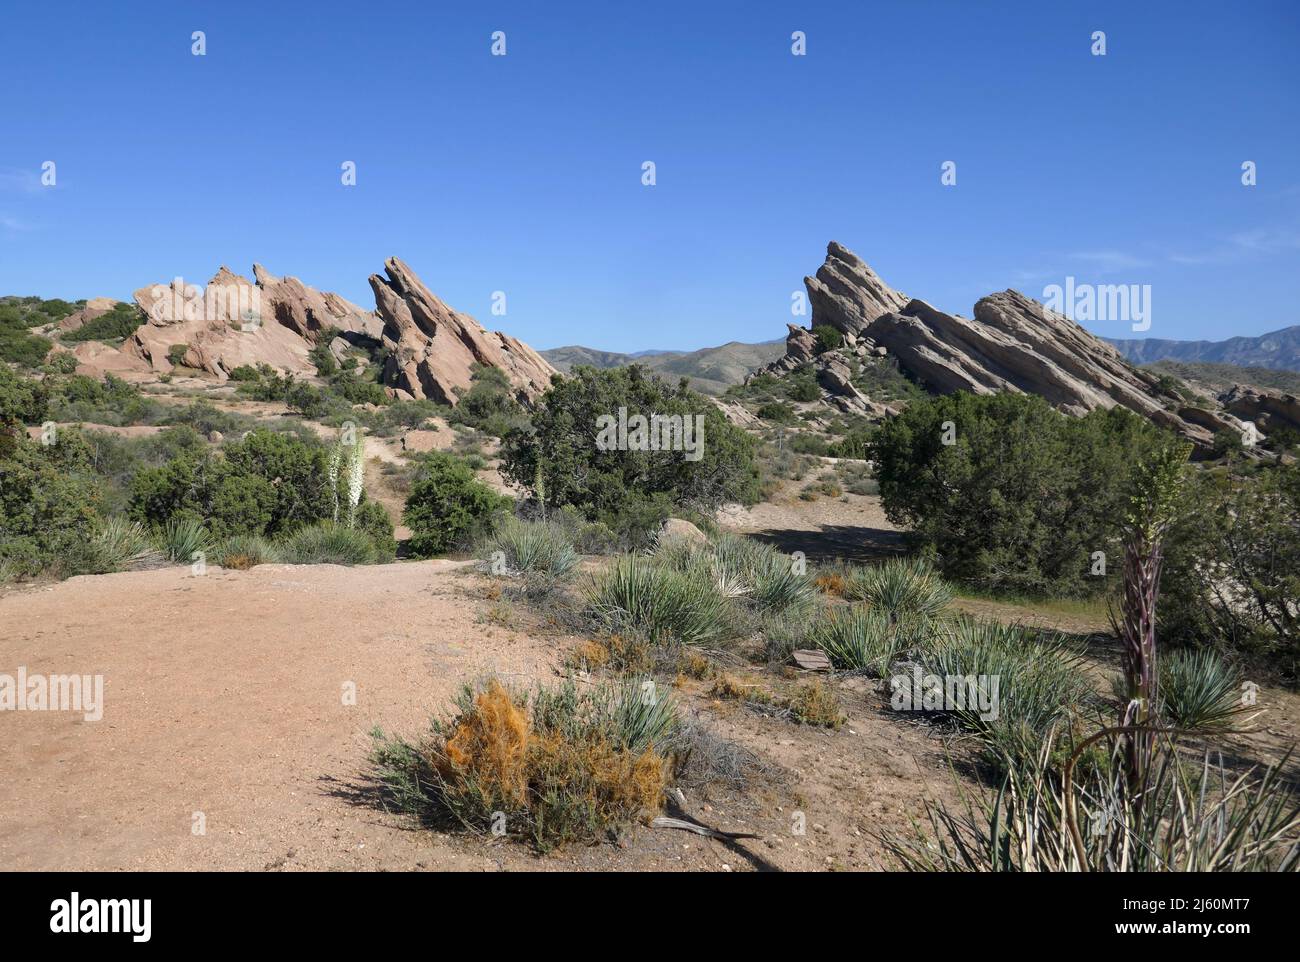 Agua Dulce, California, USA 17th April 2022 A general view of atmosphere of Vasquez Rocks Natural Park on April 17, 2022 in Agua Dulce, California, USA. This location is where Dracula with Bela Lugosi, The Flintstones Movie, Mel Brooks Blazing Saddles, Bill and Ted's Excellent Adventure with Keanu Reeves, Planet of the Apes, Star Trek, Austin Powers Man of Mystery with Mike Myers, Army of Darkness, Werewolf of London, Michael Jackson Black and White Video, Bette Midler For the Boys, Rihanna and Justin Timberlake Rehab Video, Steal My Girl with One Direction, Airwolf, A Team, The Bionic Woman, Stock Photo